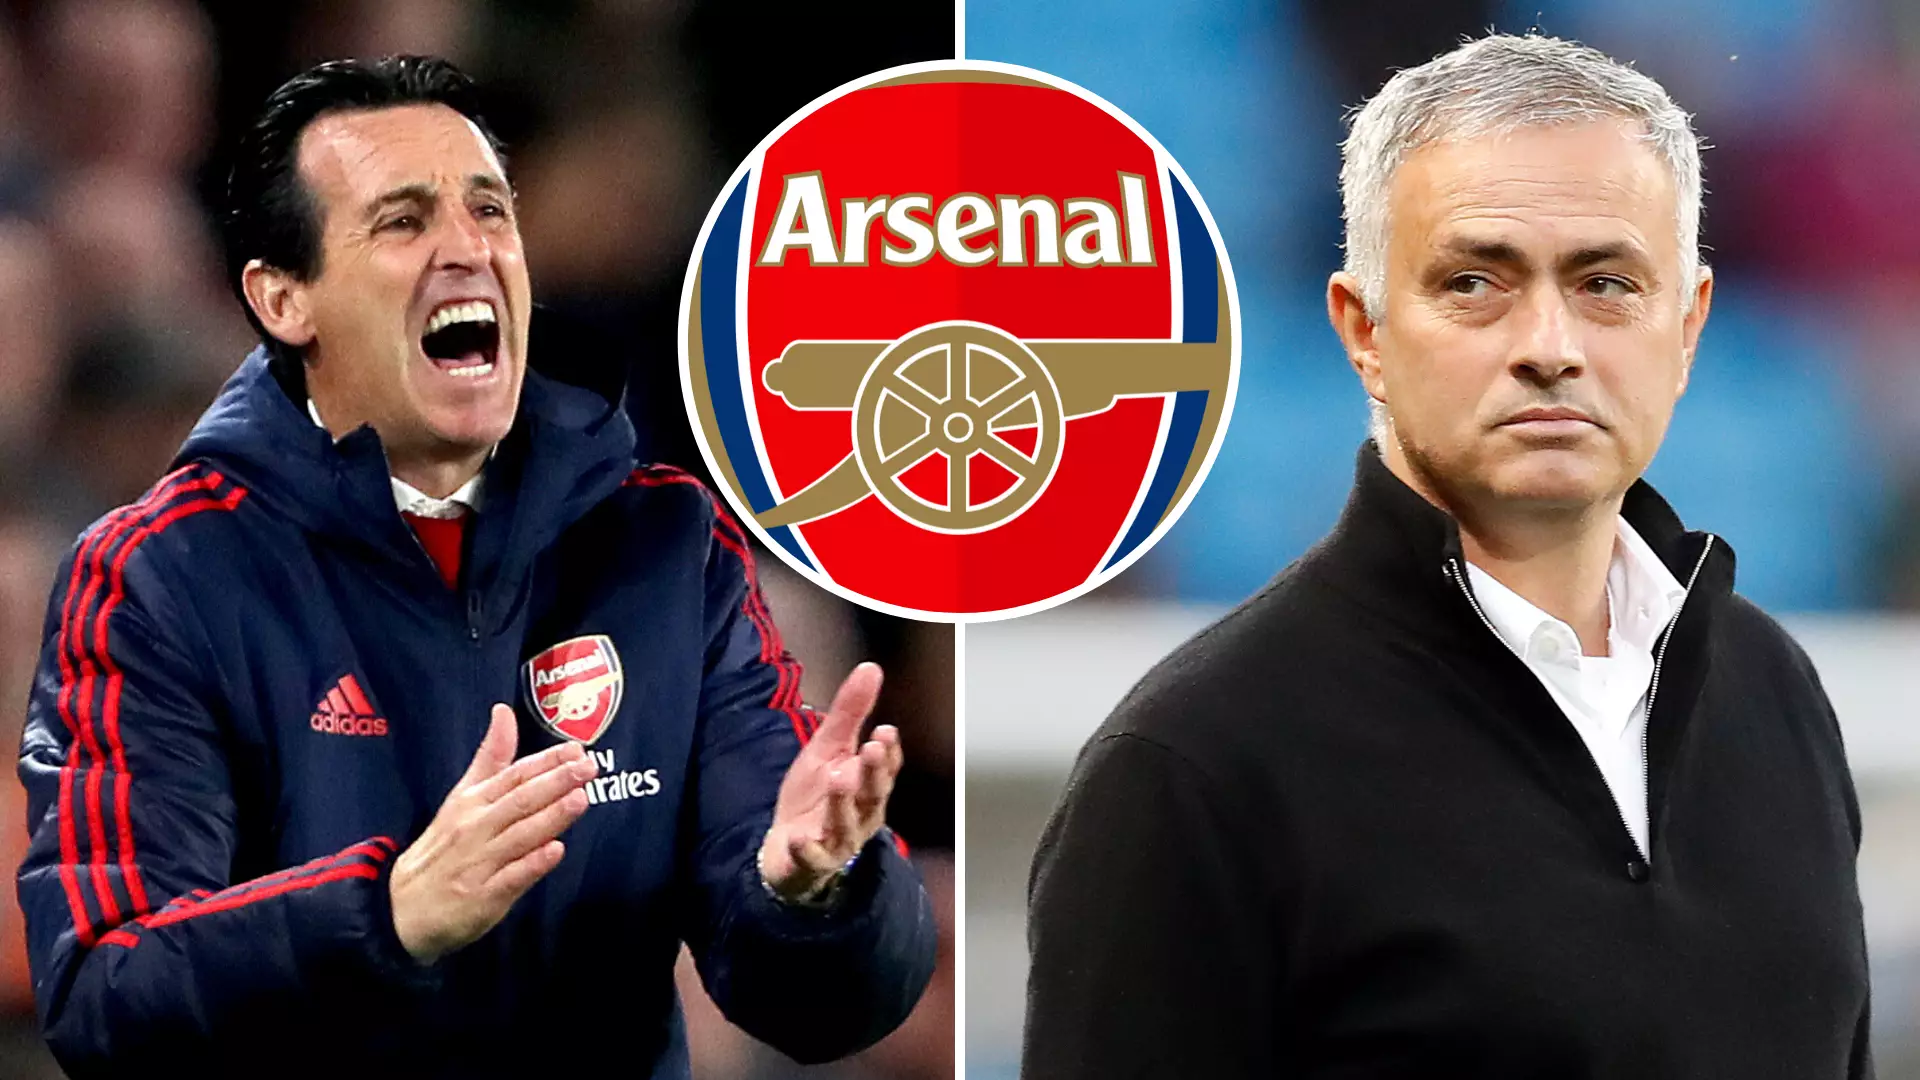 Jose Mourinho Impressed Arsenal With Squad Plans After 'Dining With Gunners Chief Raul Sanllehi'